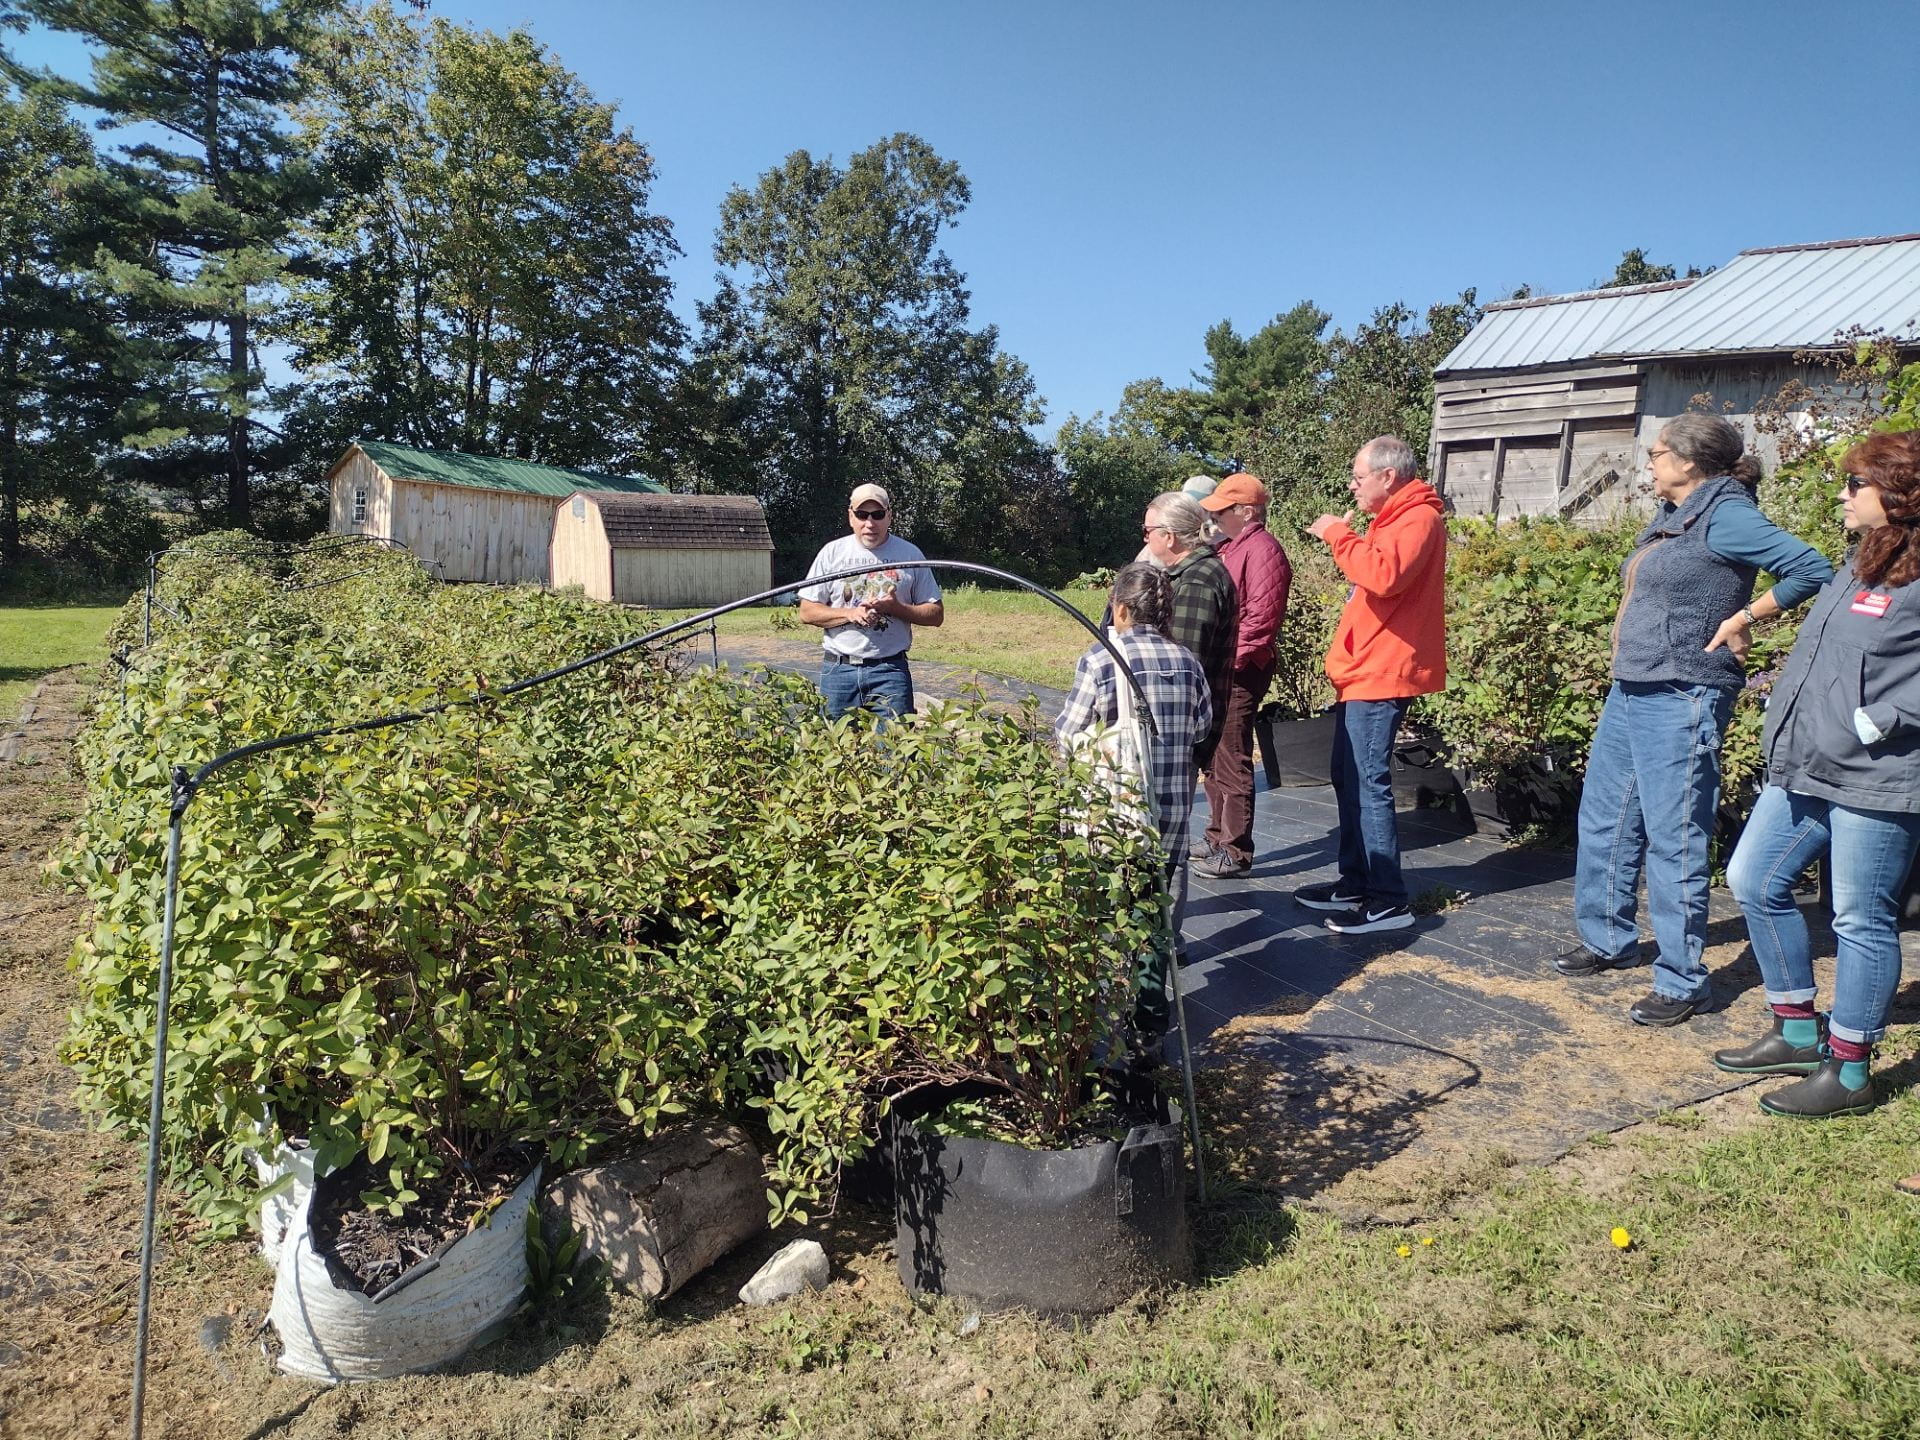 Duane shows off his honeyberry bushes in Evans Mills, NY